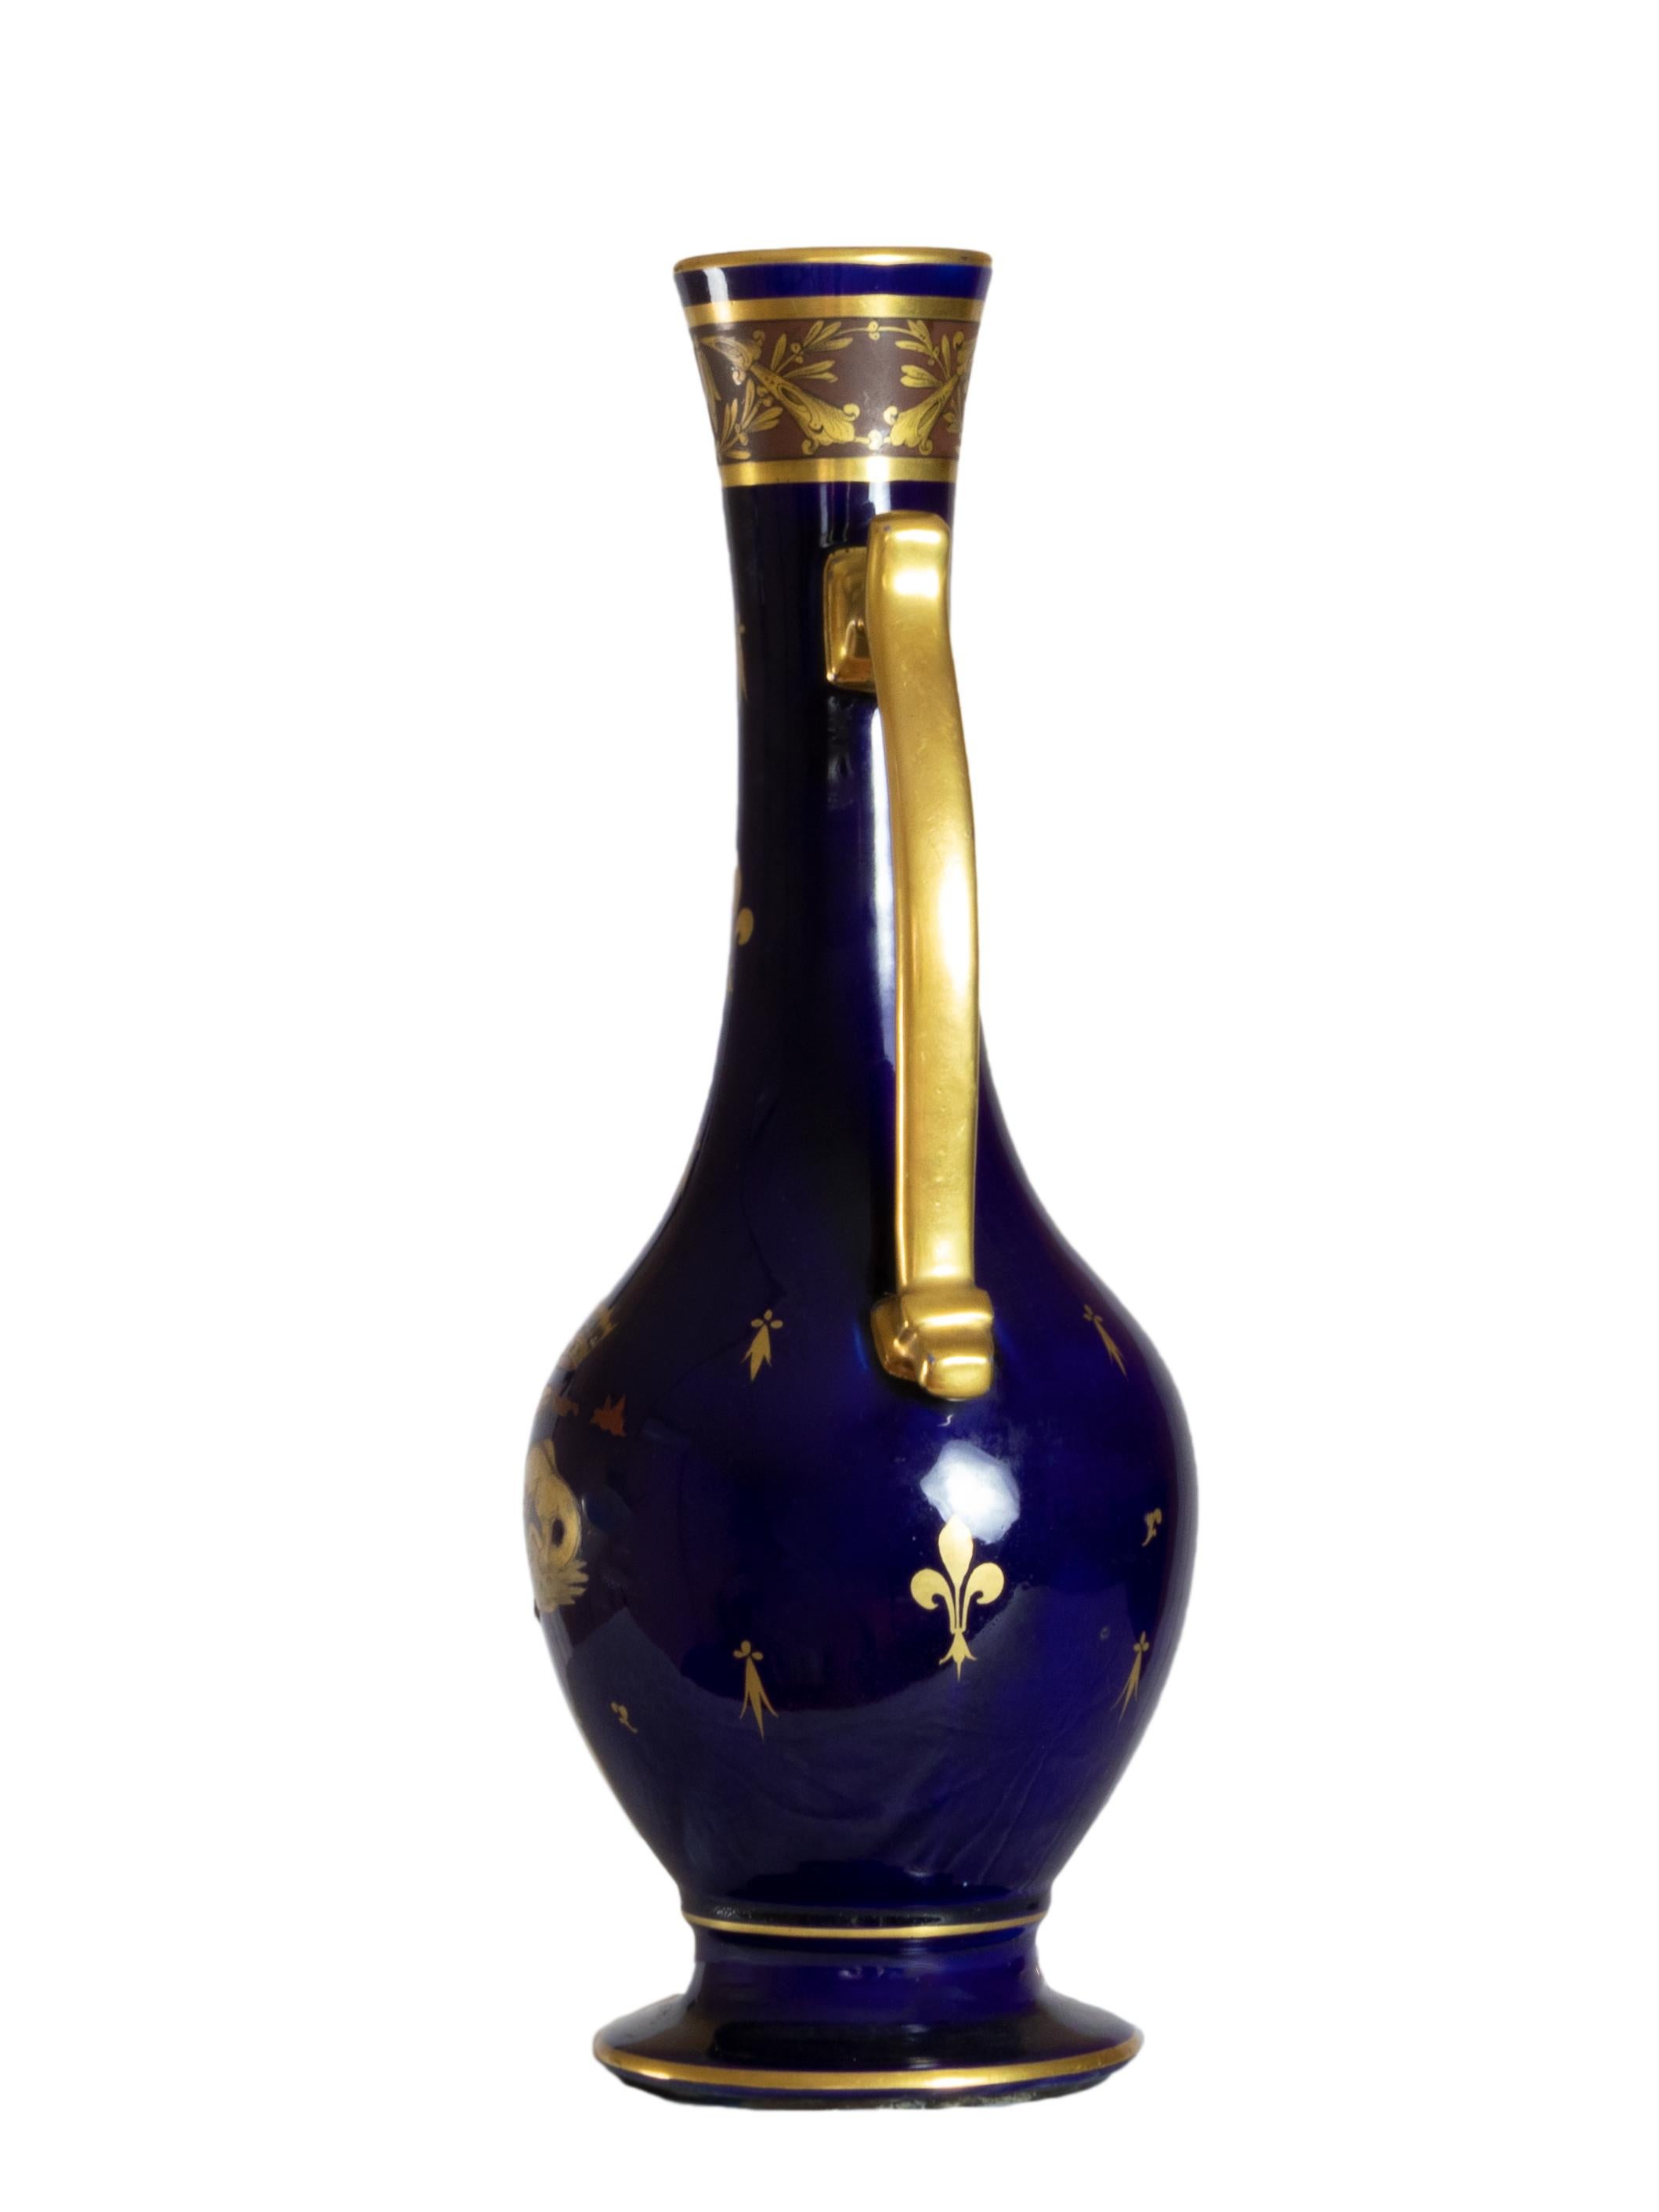 Amphora of Limoges 'solifleur' titled Salamandre à Chambord with a navy blue background, cut and cut edge, in the centre the symbol «Salamandre à Chambord» in enamel and gold, on the reverse coat of arms of the fleur-de-lis surmounted by a royal